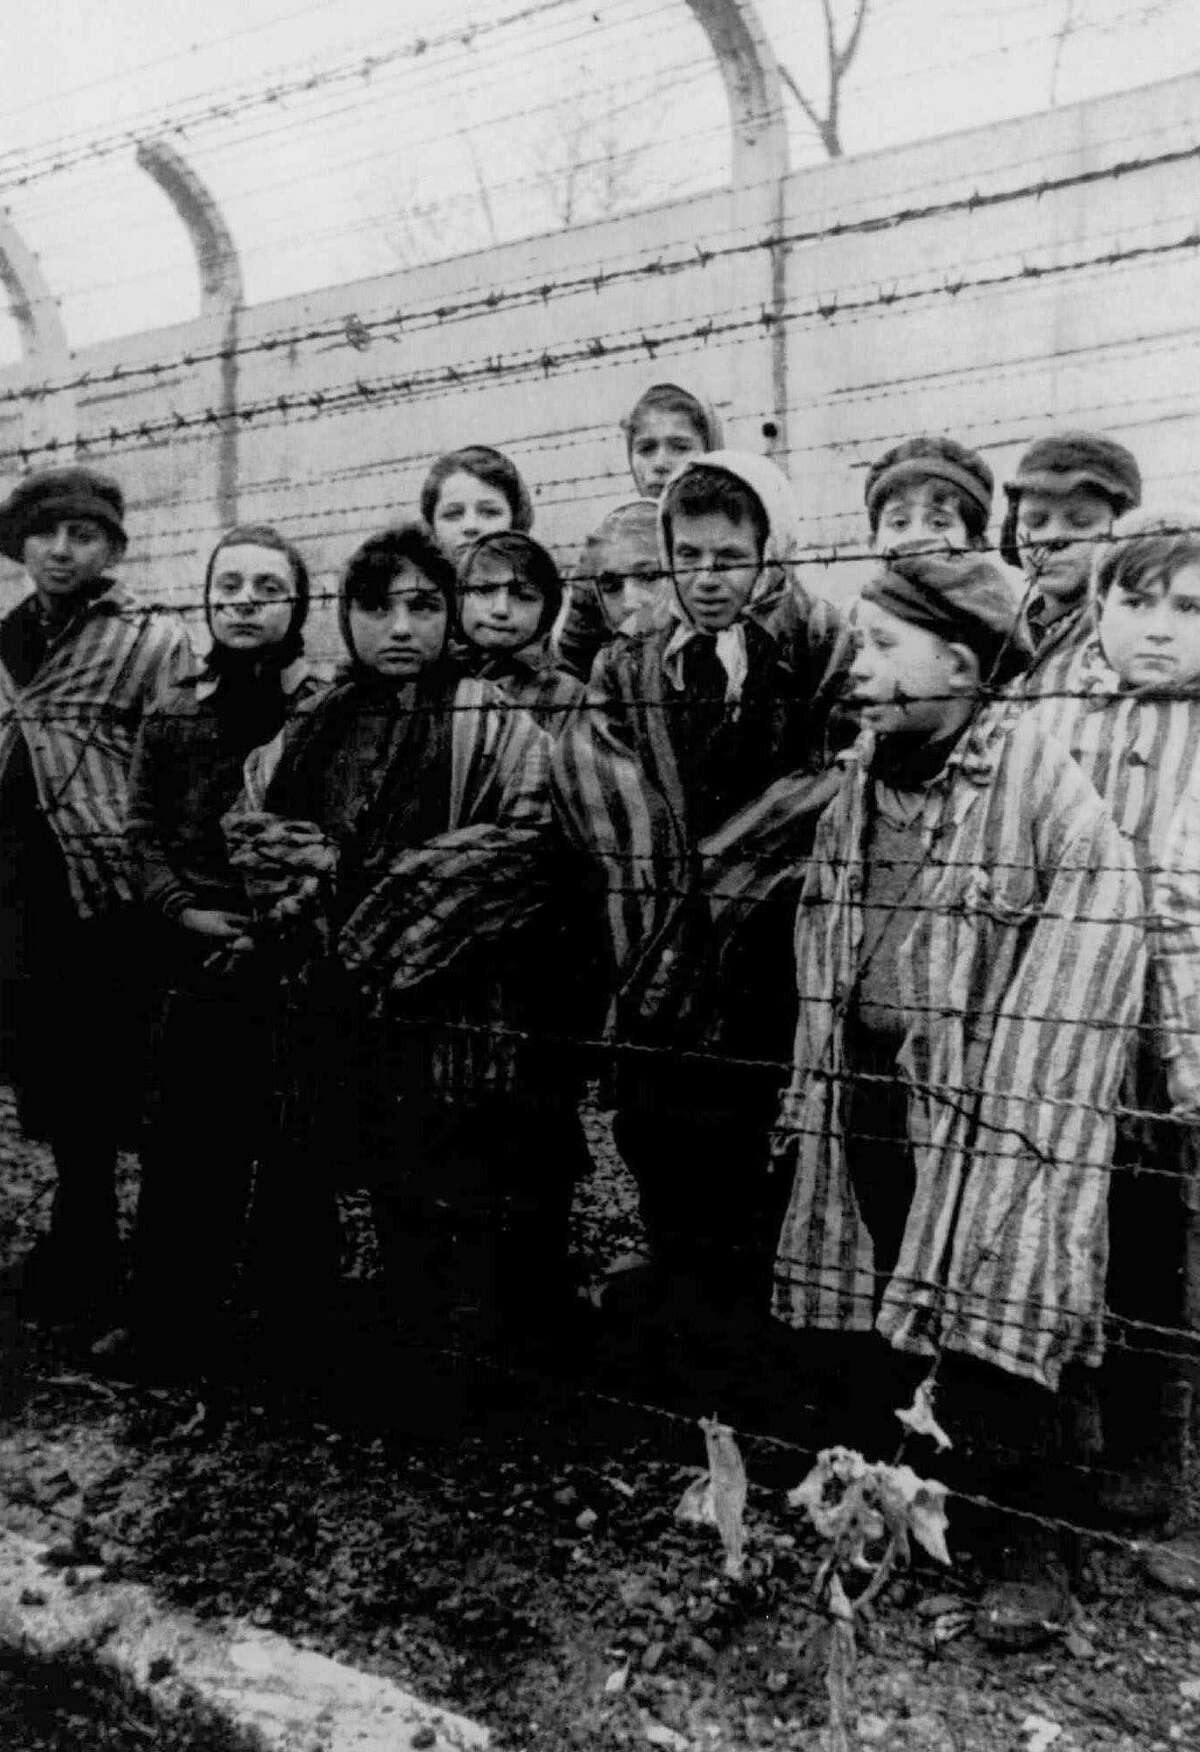 Children on the verge of liberation from Auschwitz. The Holocaust was an atrocity, not one to be debated with opposing viewpoints.